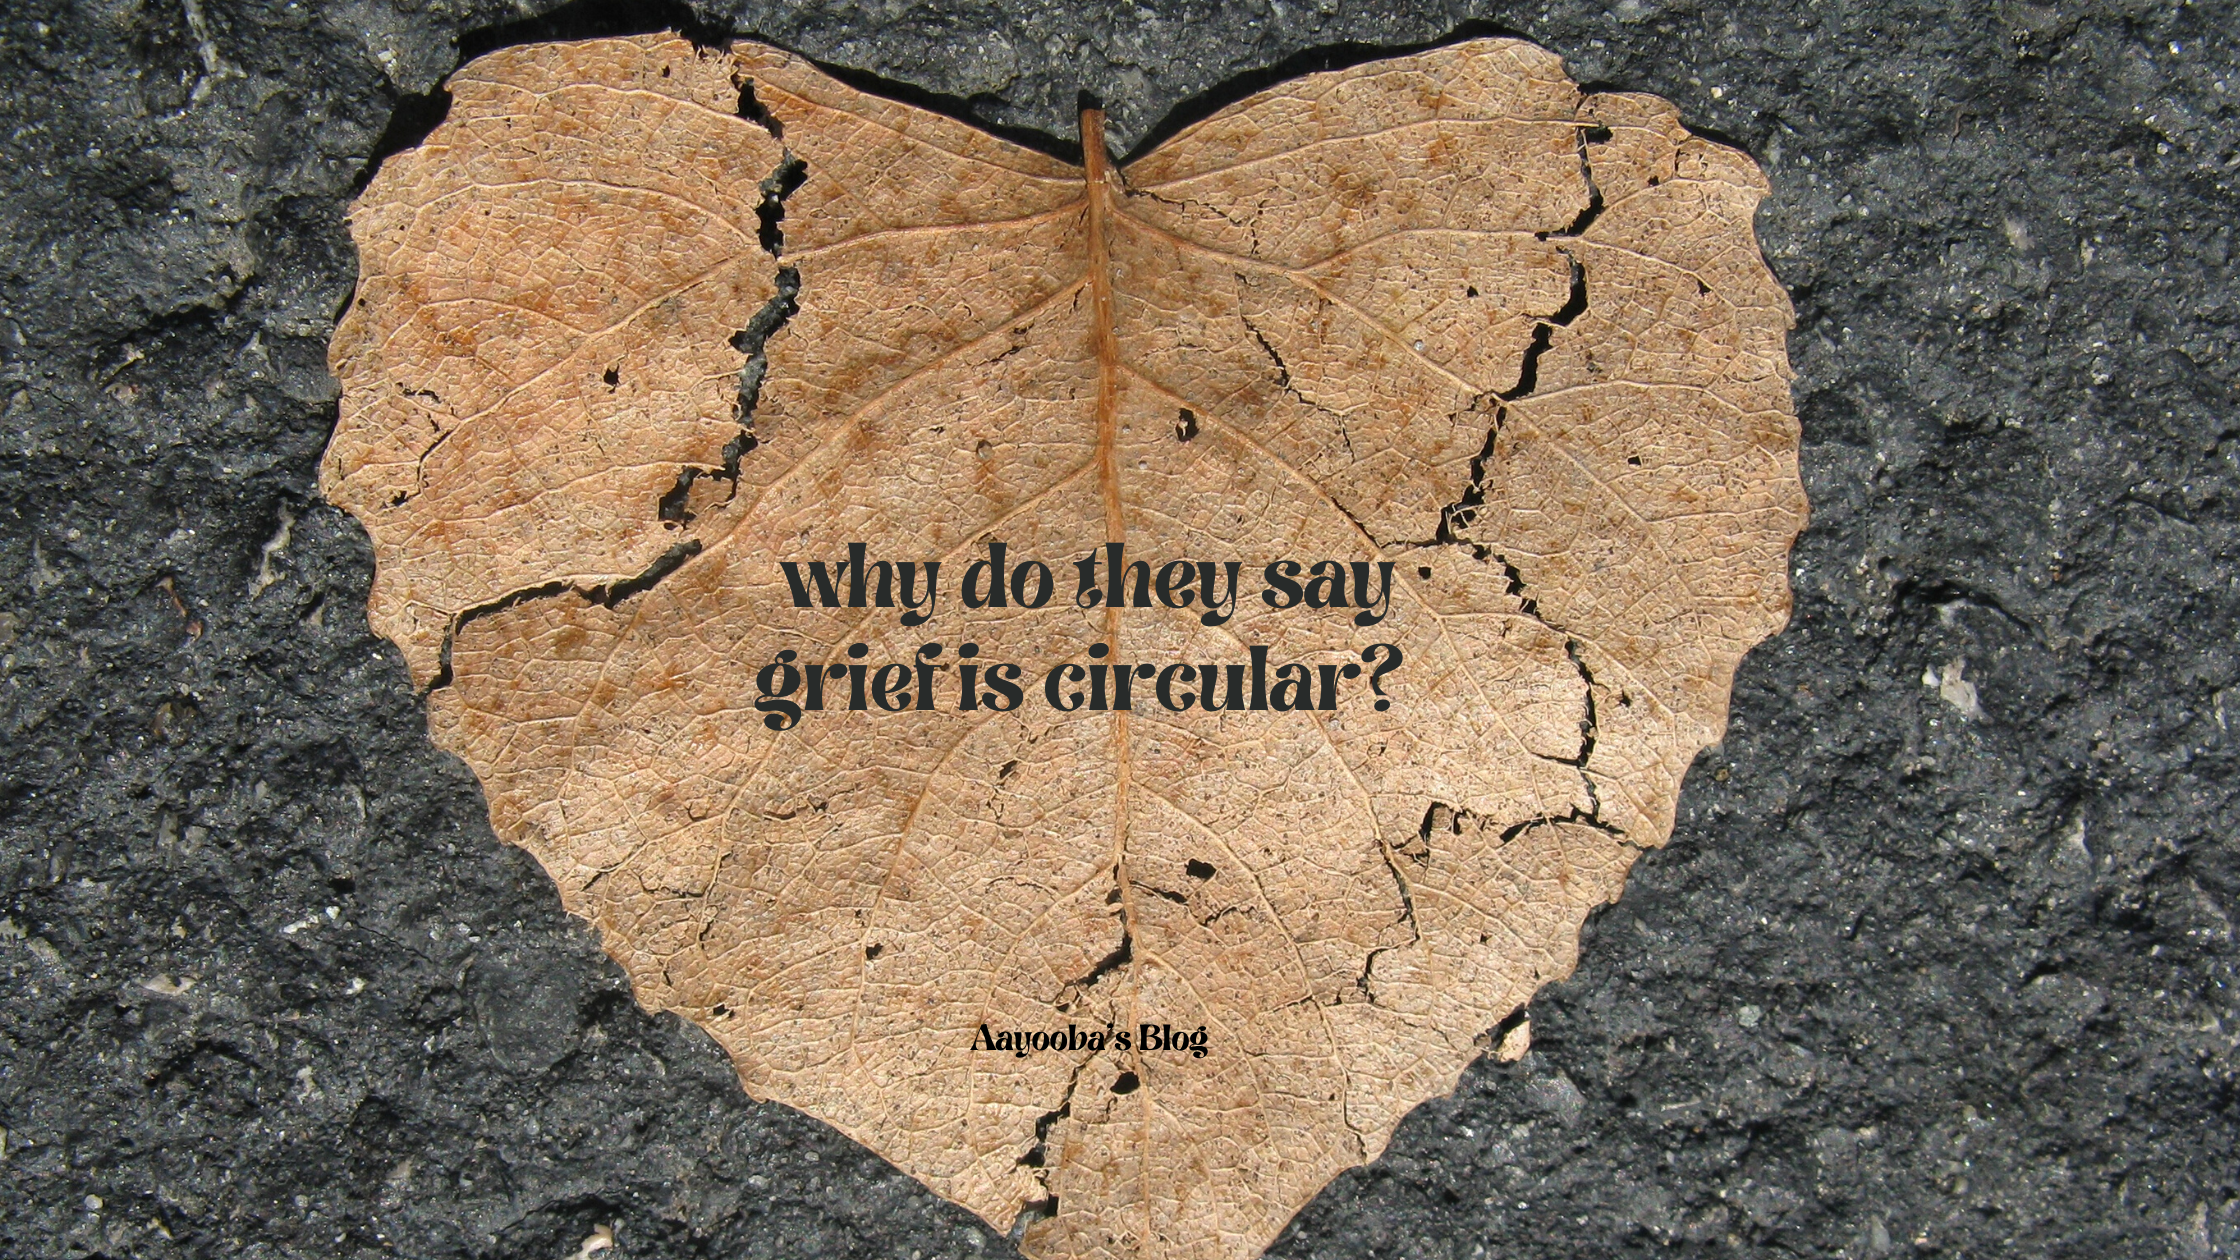 heart-shaped leaf broken into parts but put back together with caption 'why do they say grief is circular?' by Aayooba's blog